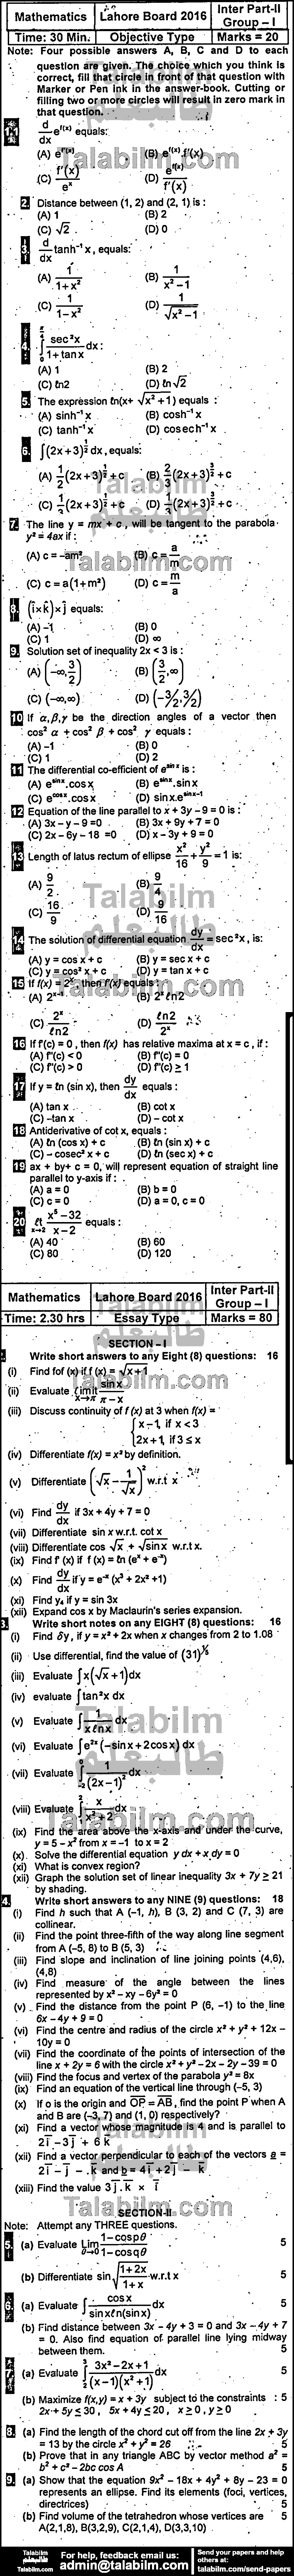 Math 0 past paper for Group-I 2016